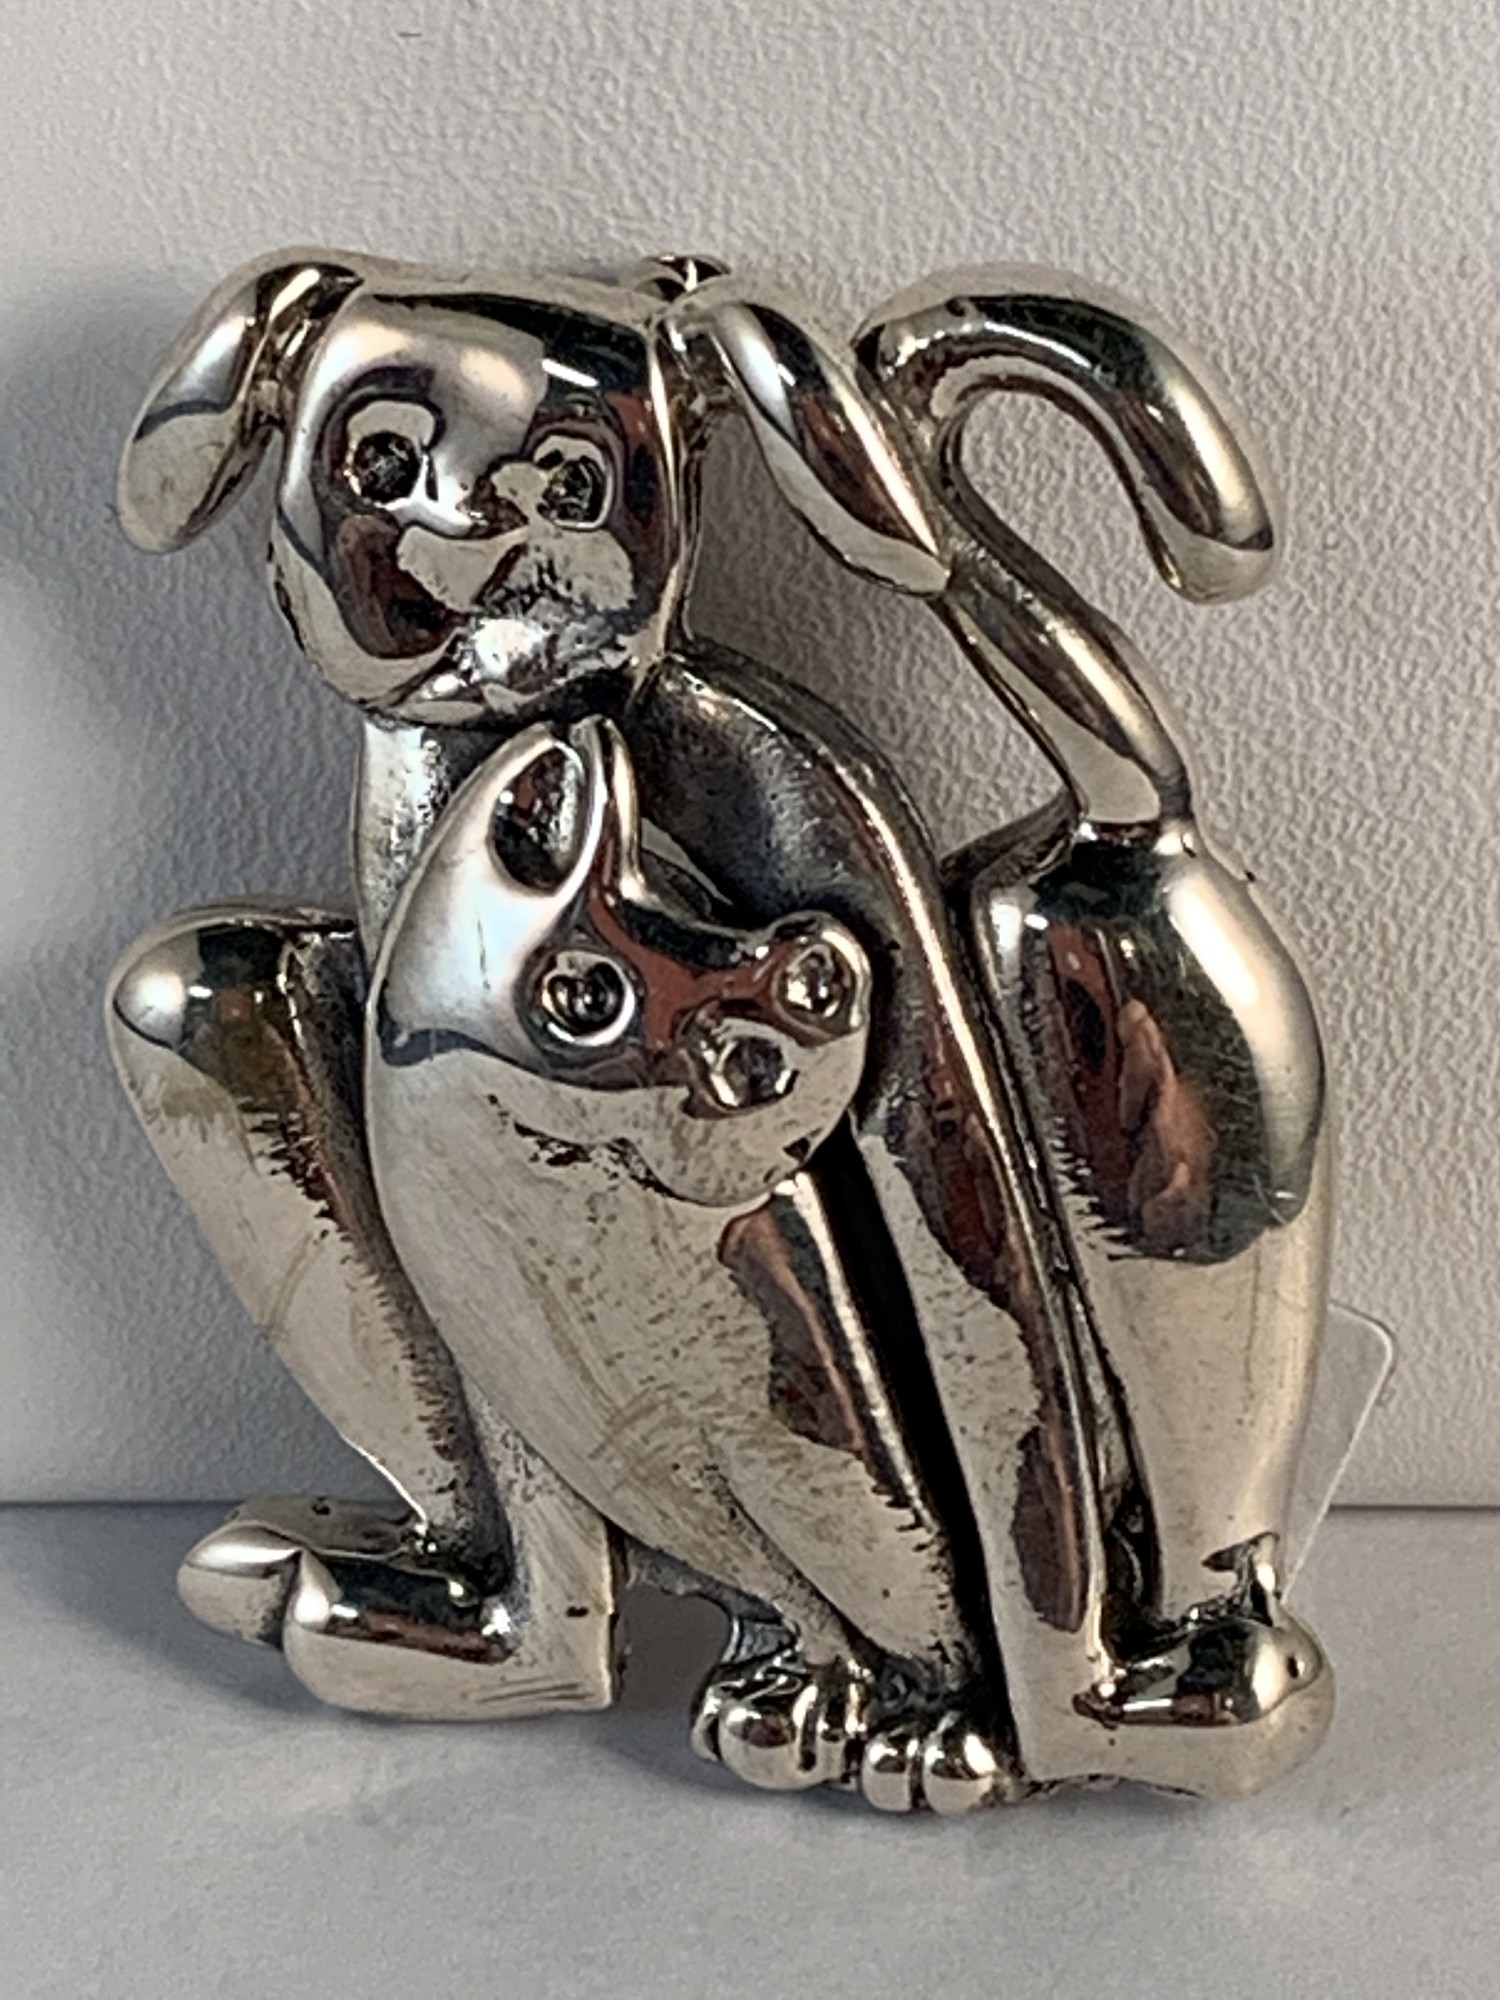 Dog & Cat Pin
Sterling Silver
1.5\" X 1.5\"
$49